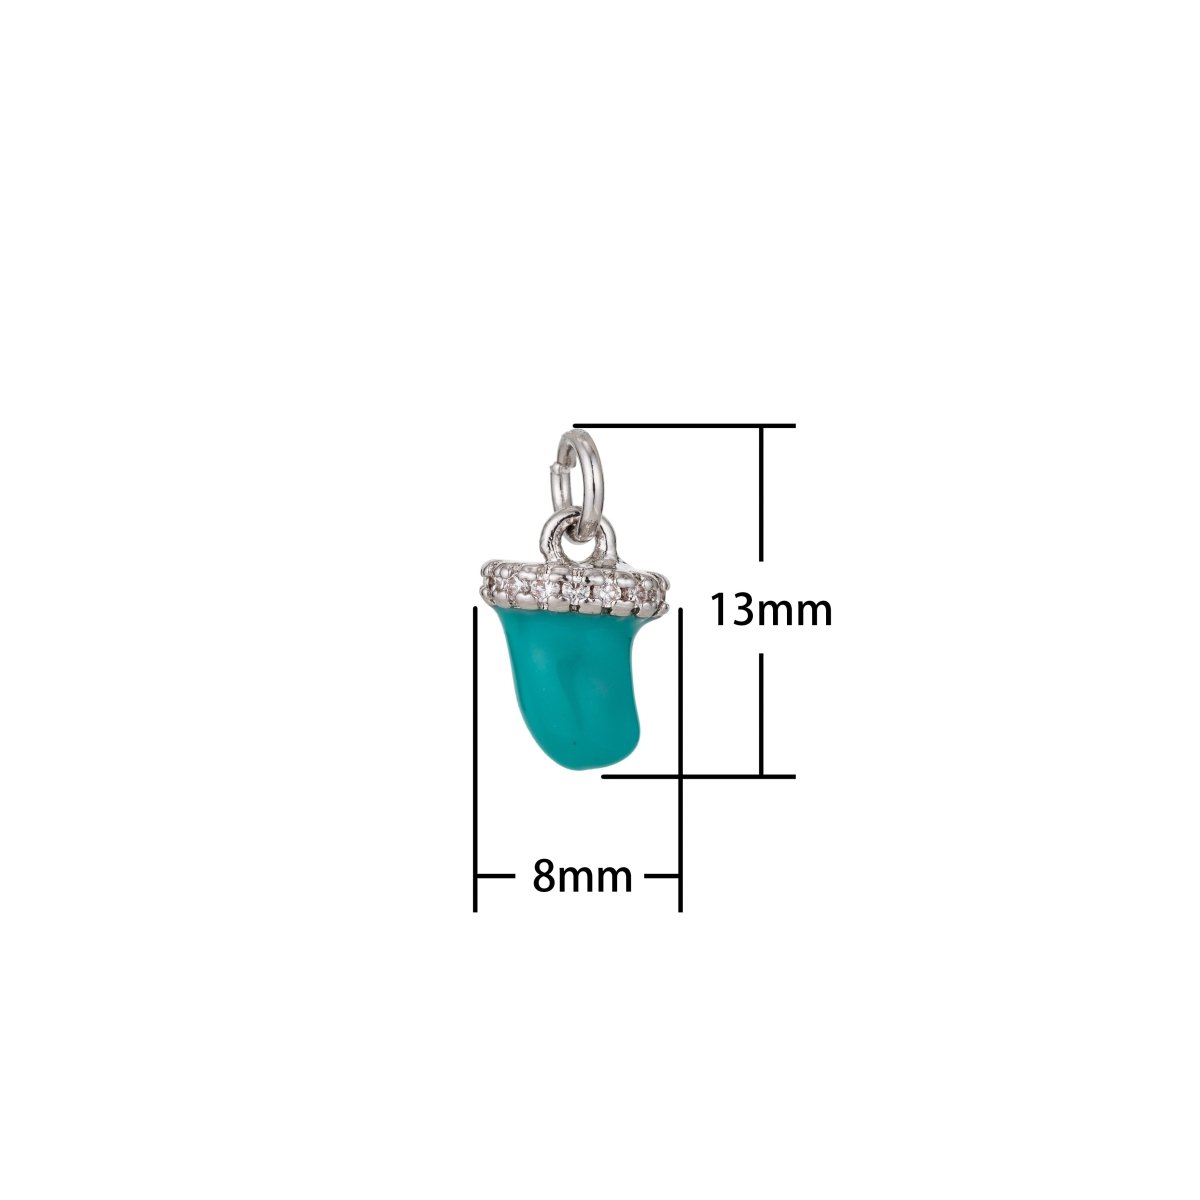 Dainty Tiny Tusk Drop Charm, Dainty Horn Turquoise Charms with CZ for Bracelet Earring Necklace Jewelry Making Supply Gold Filled, C433 - DLUXCA